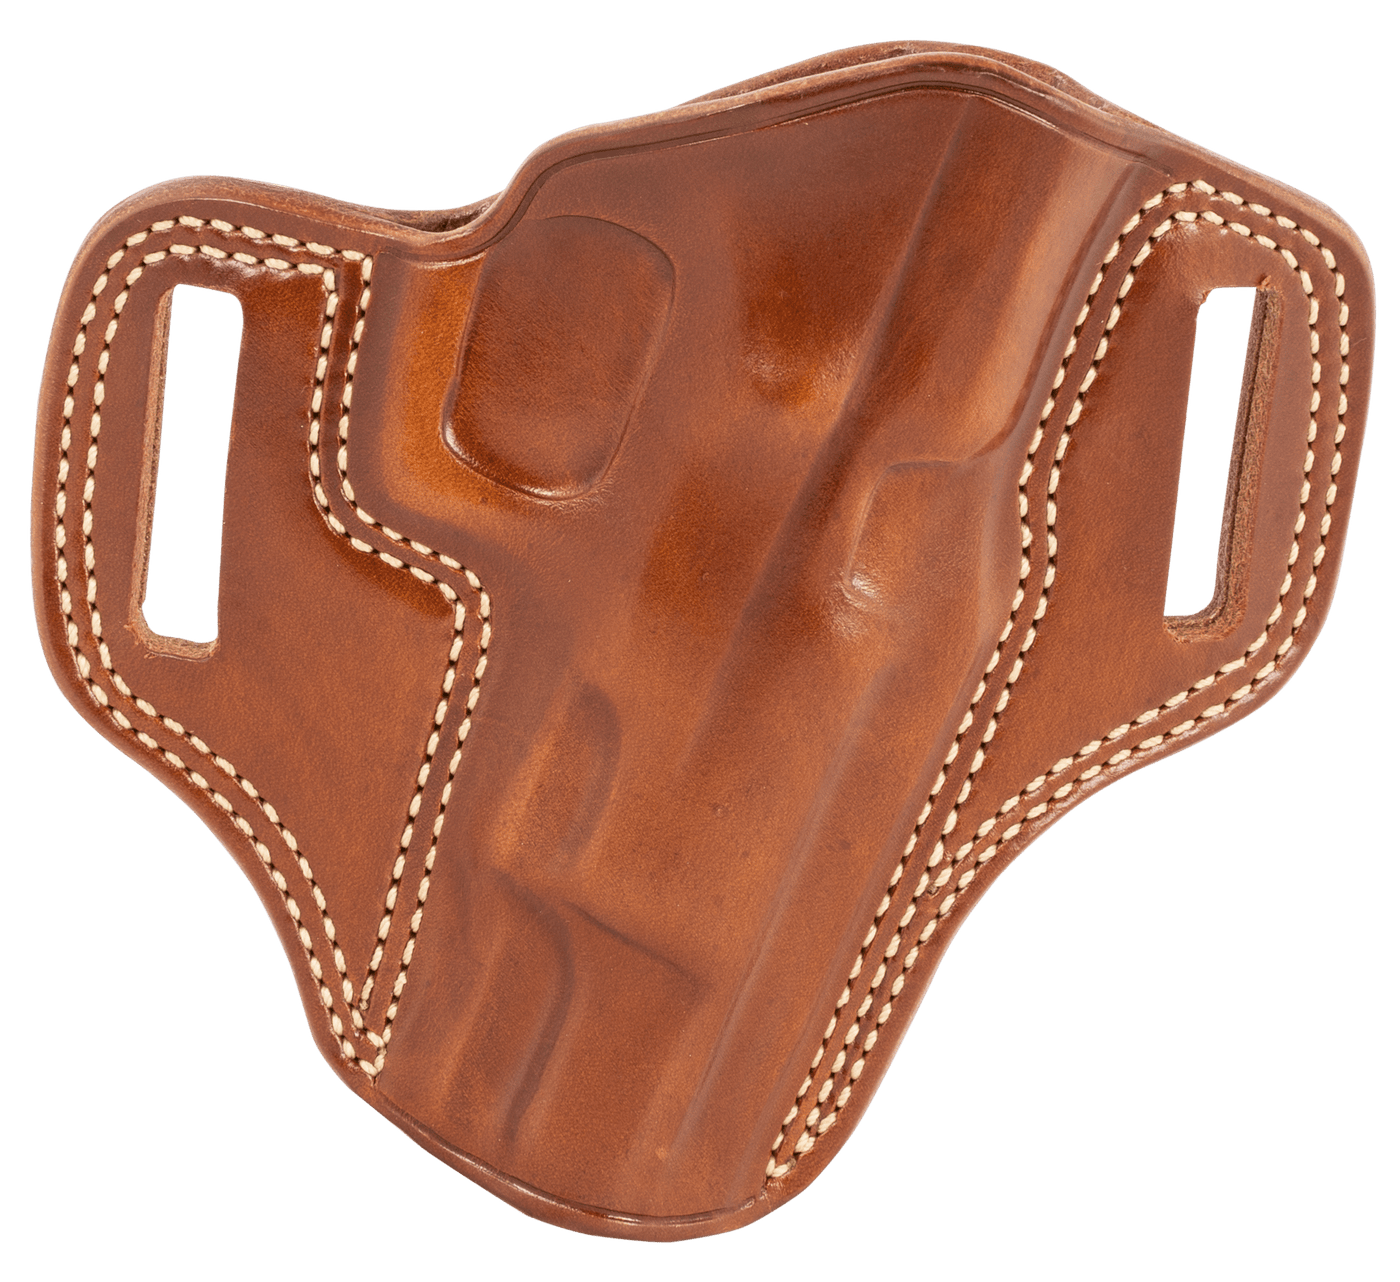 Galco Galco Combat Master Belt Hlstr - Rh Leather Cz 75b 9mm Tan< Holsters And Related Items